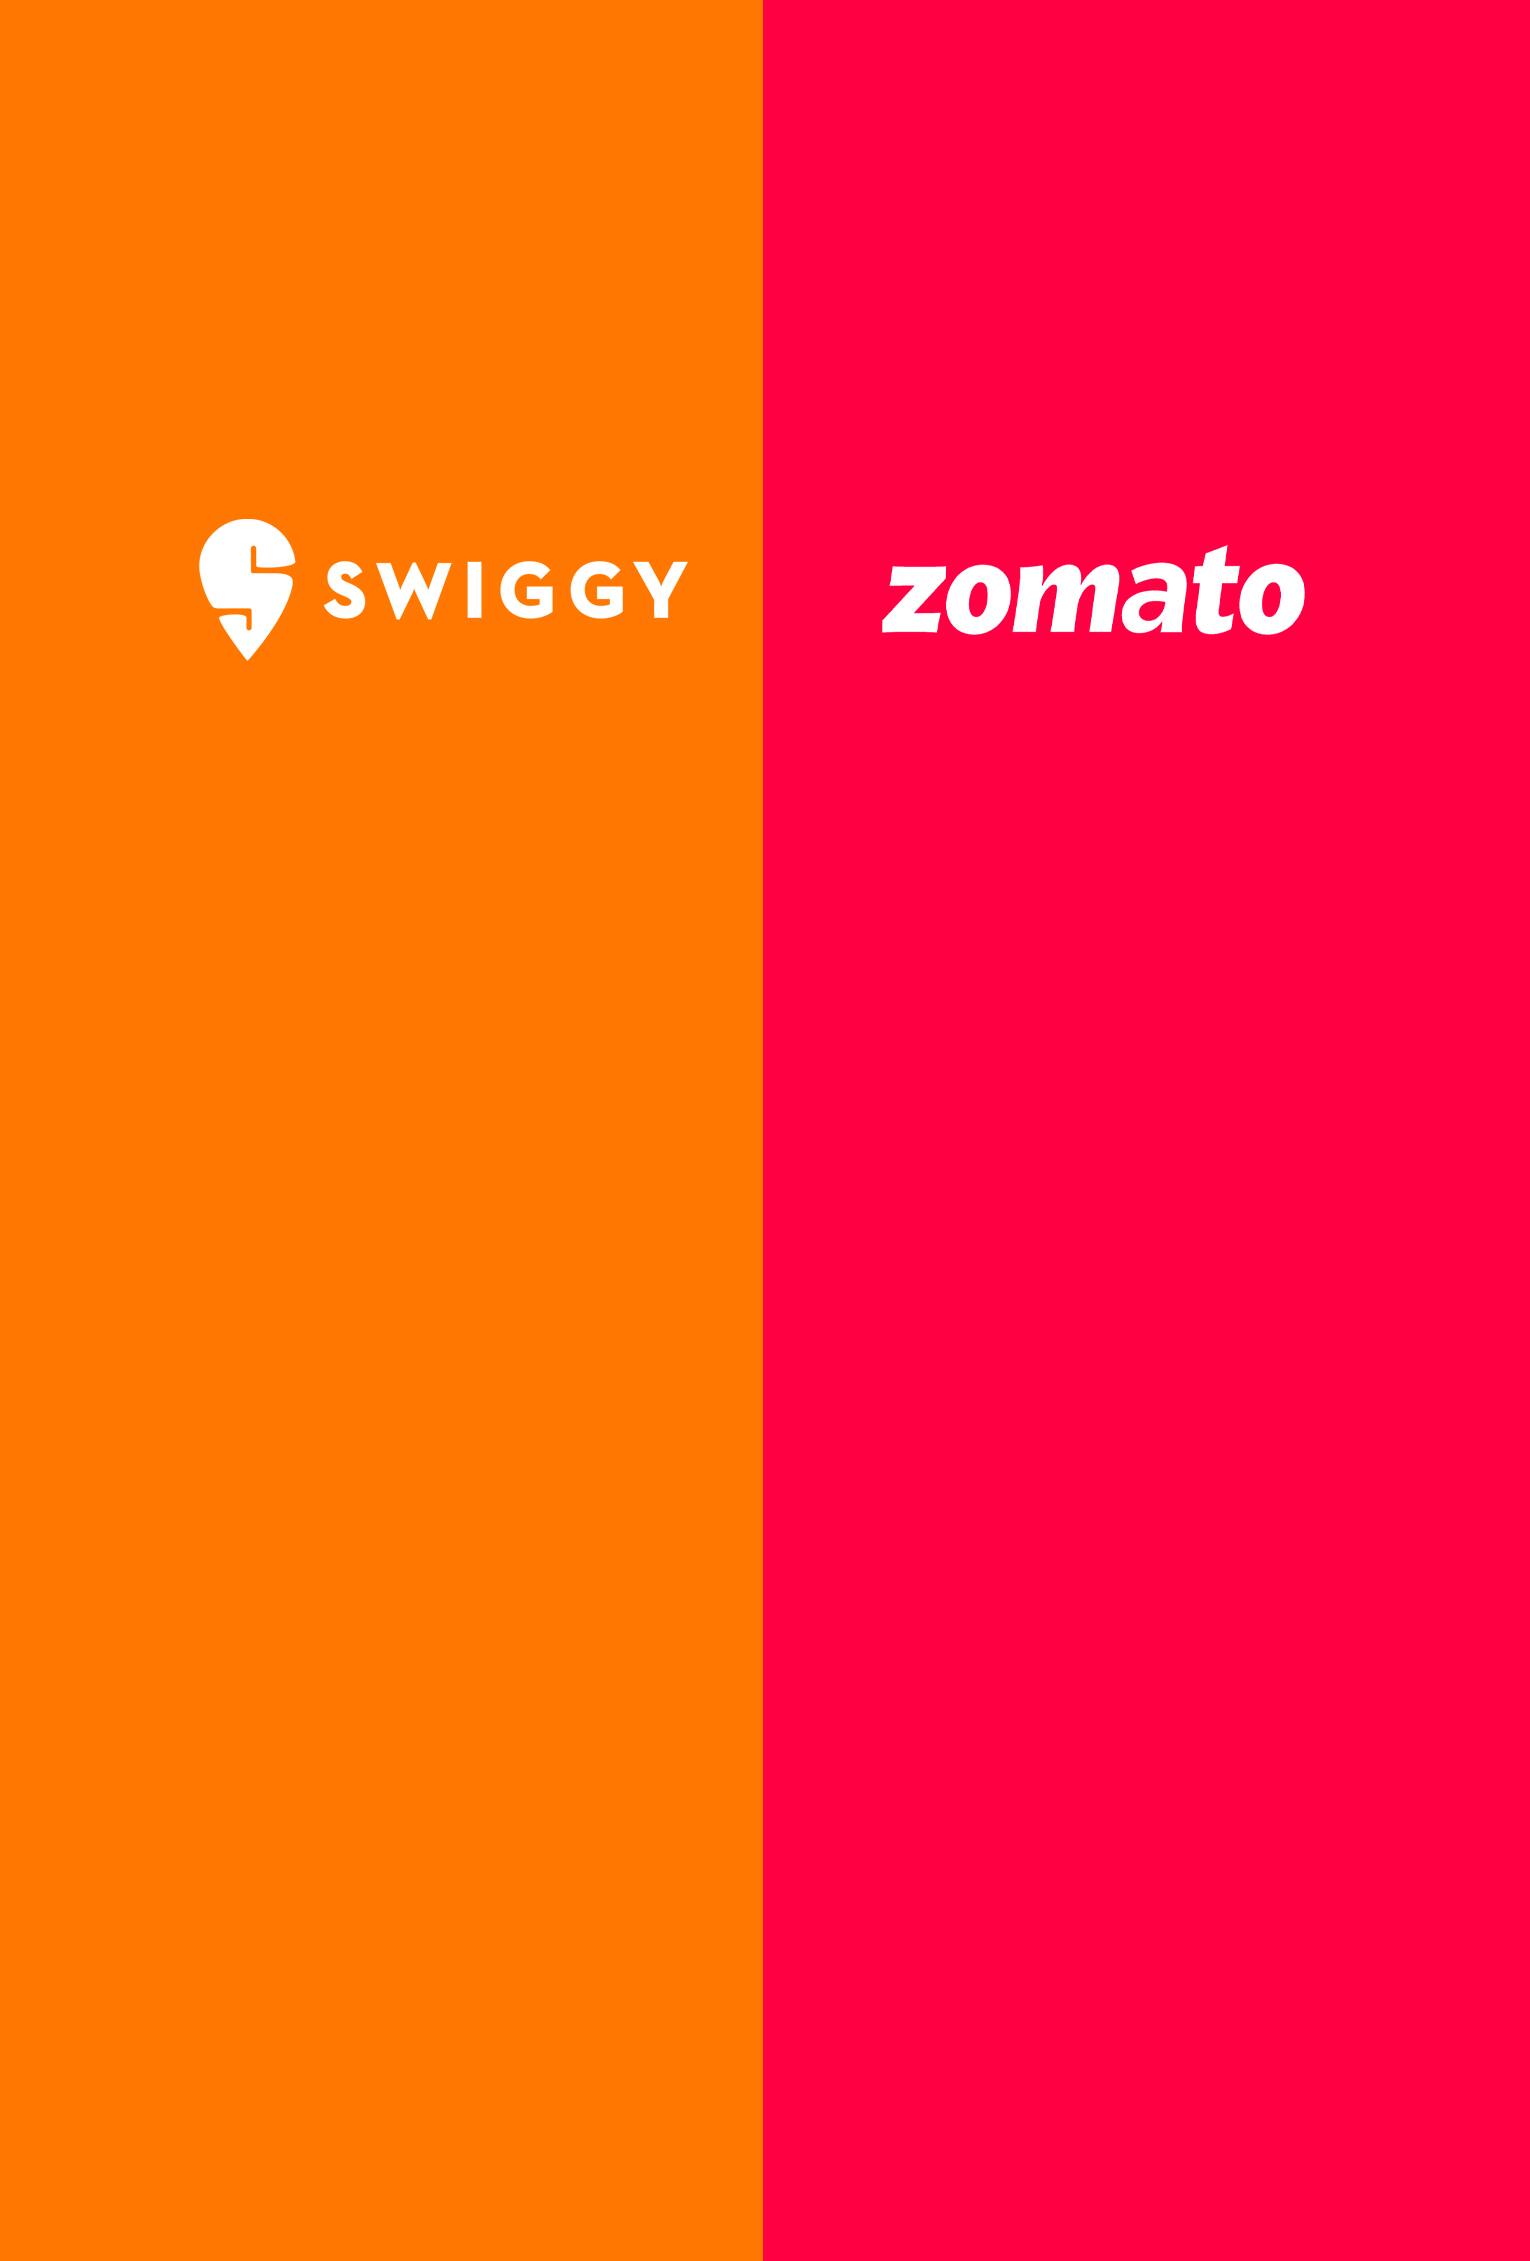 Swiggy seeks higher commissions from restaurants, Zomato may follow: Reports